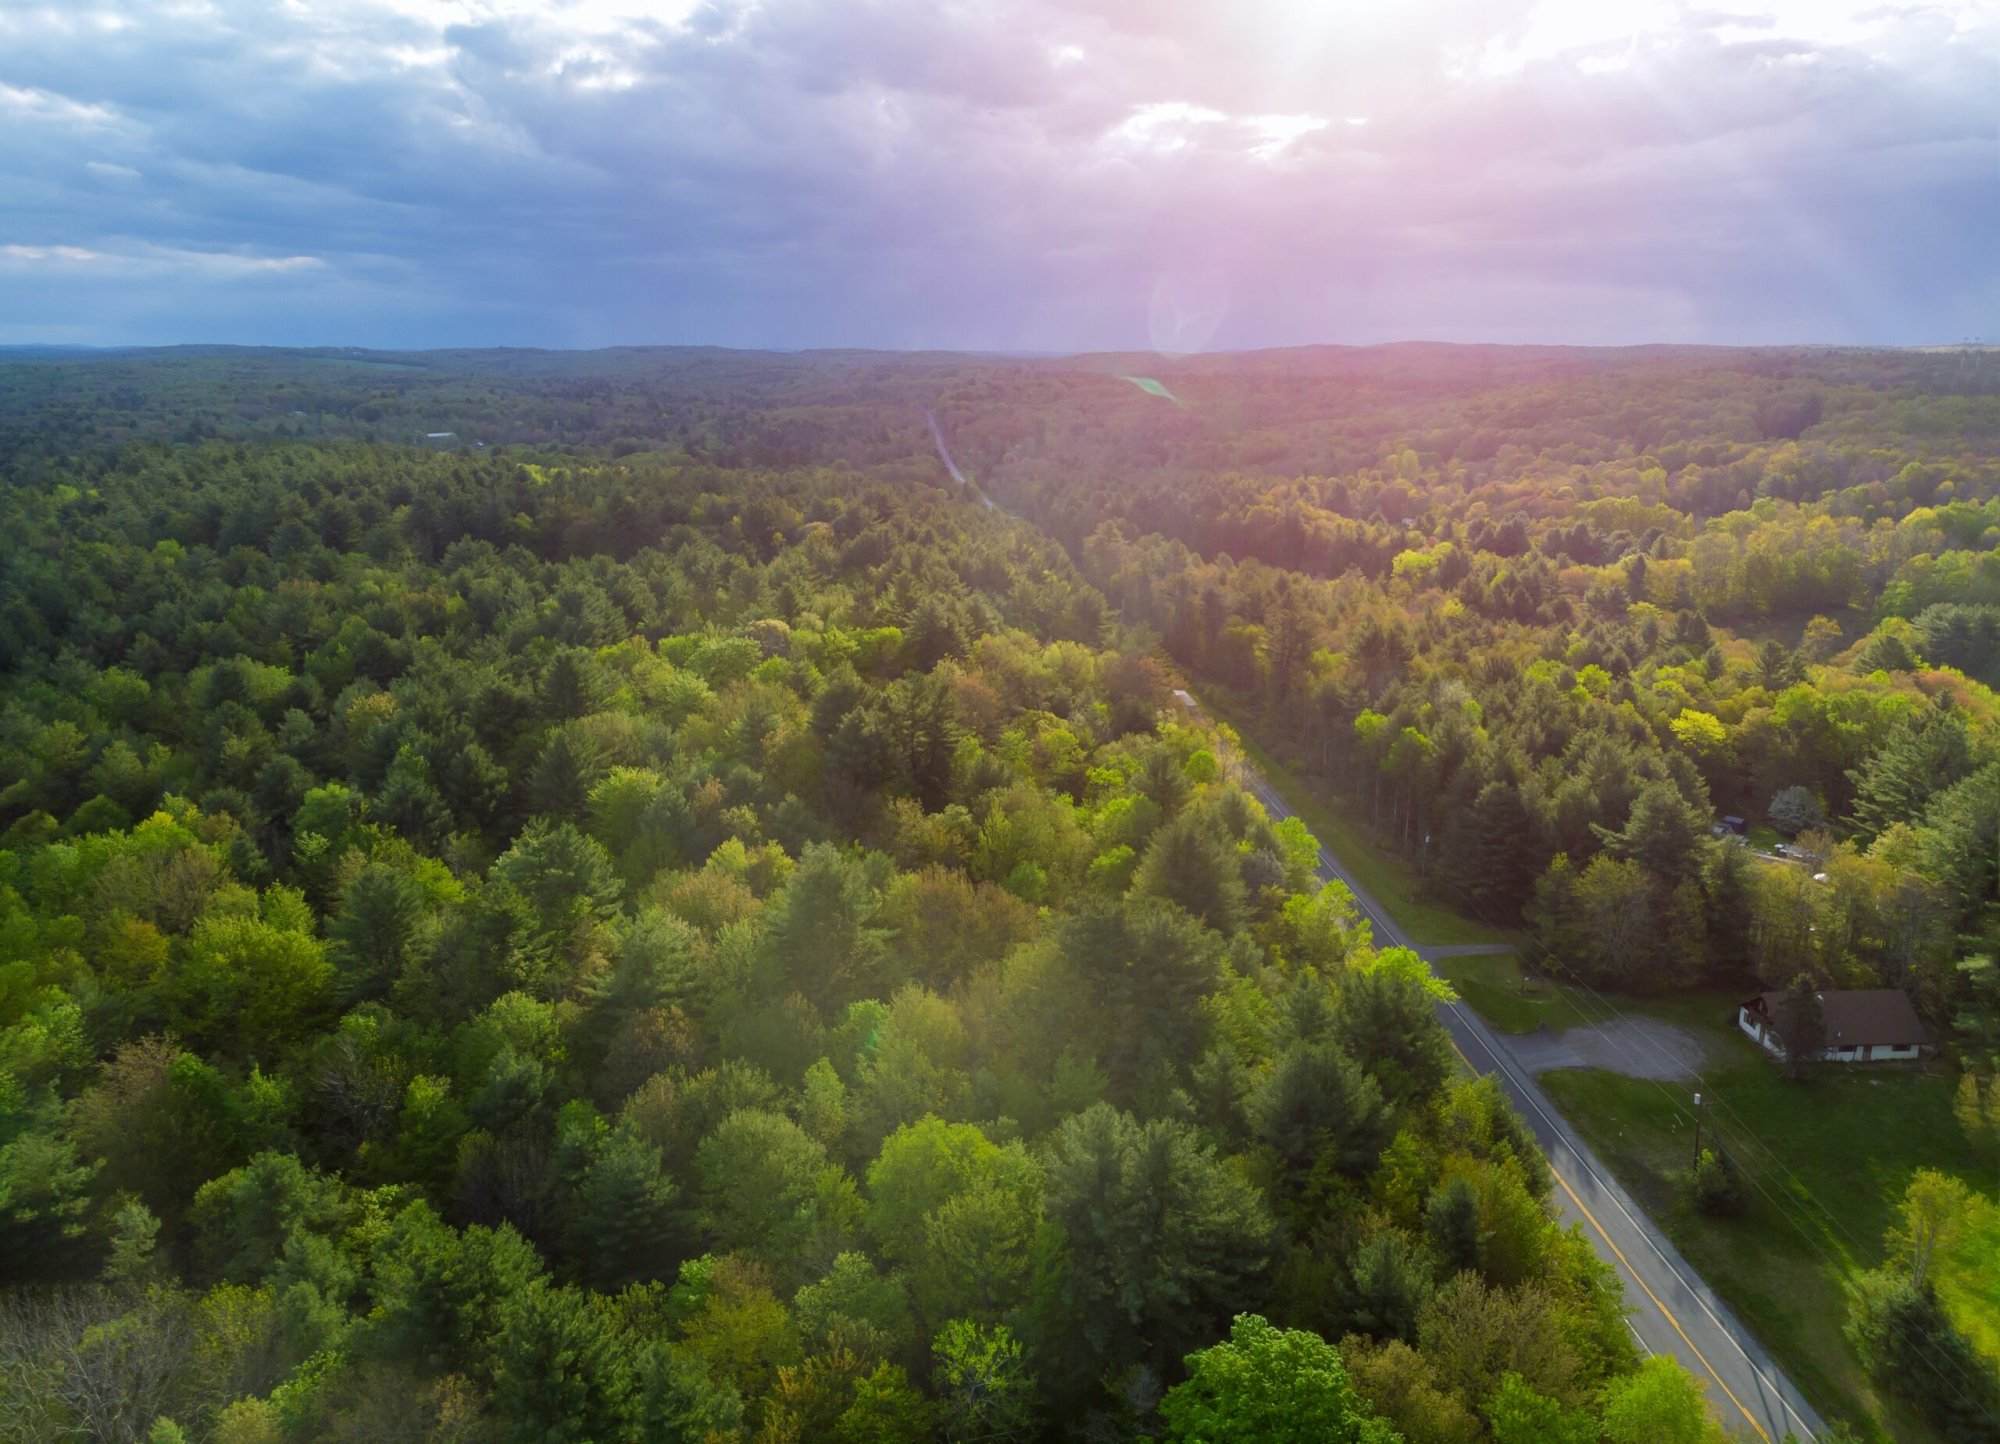 An aerial view of a forest and road.